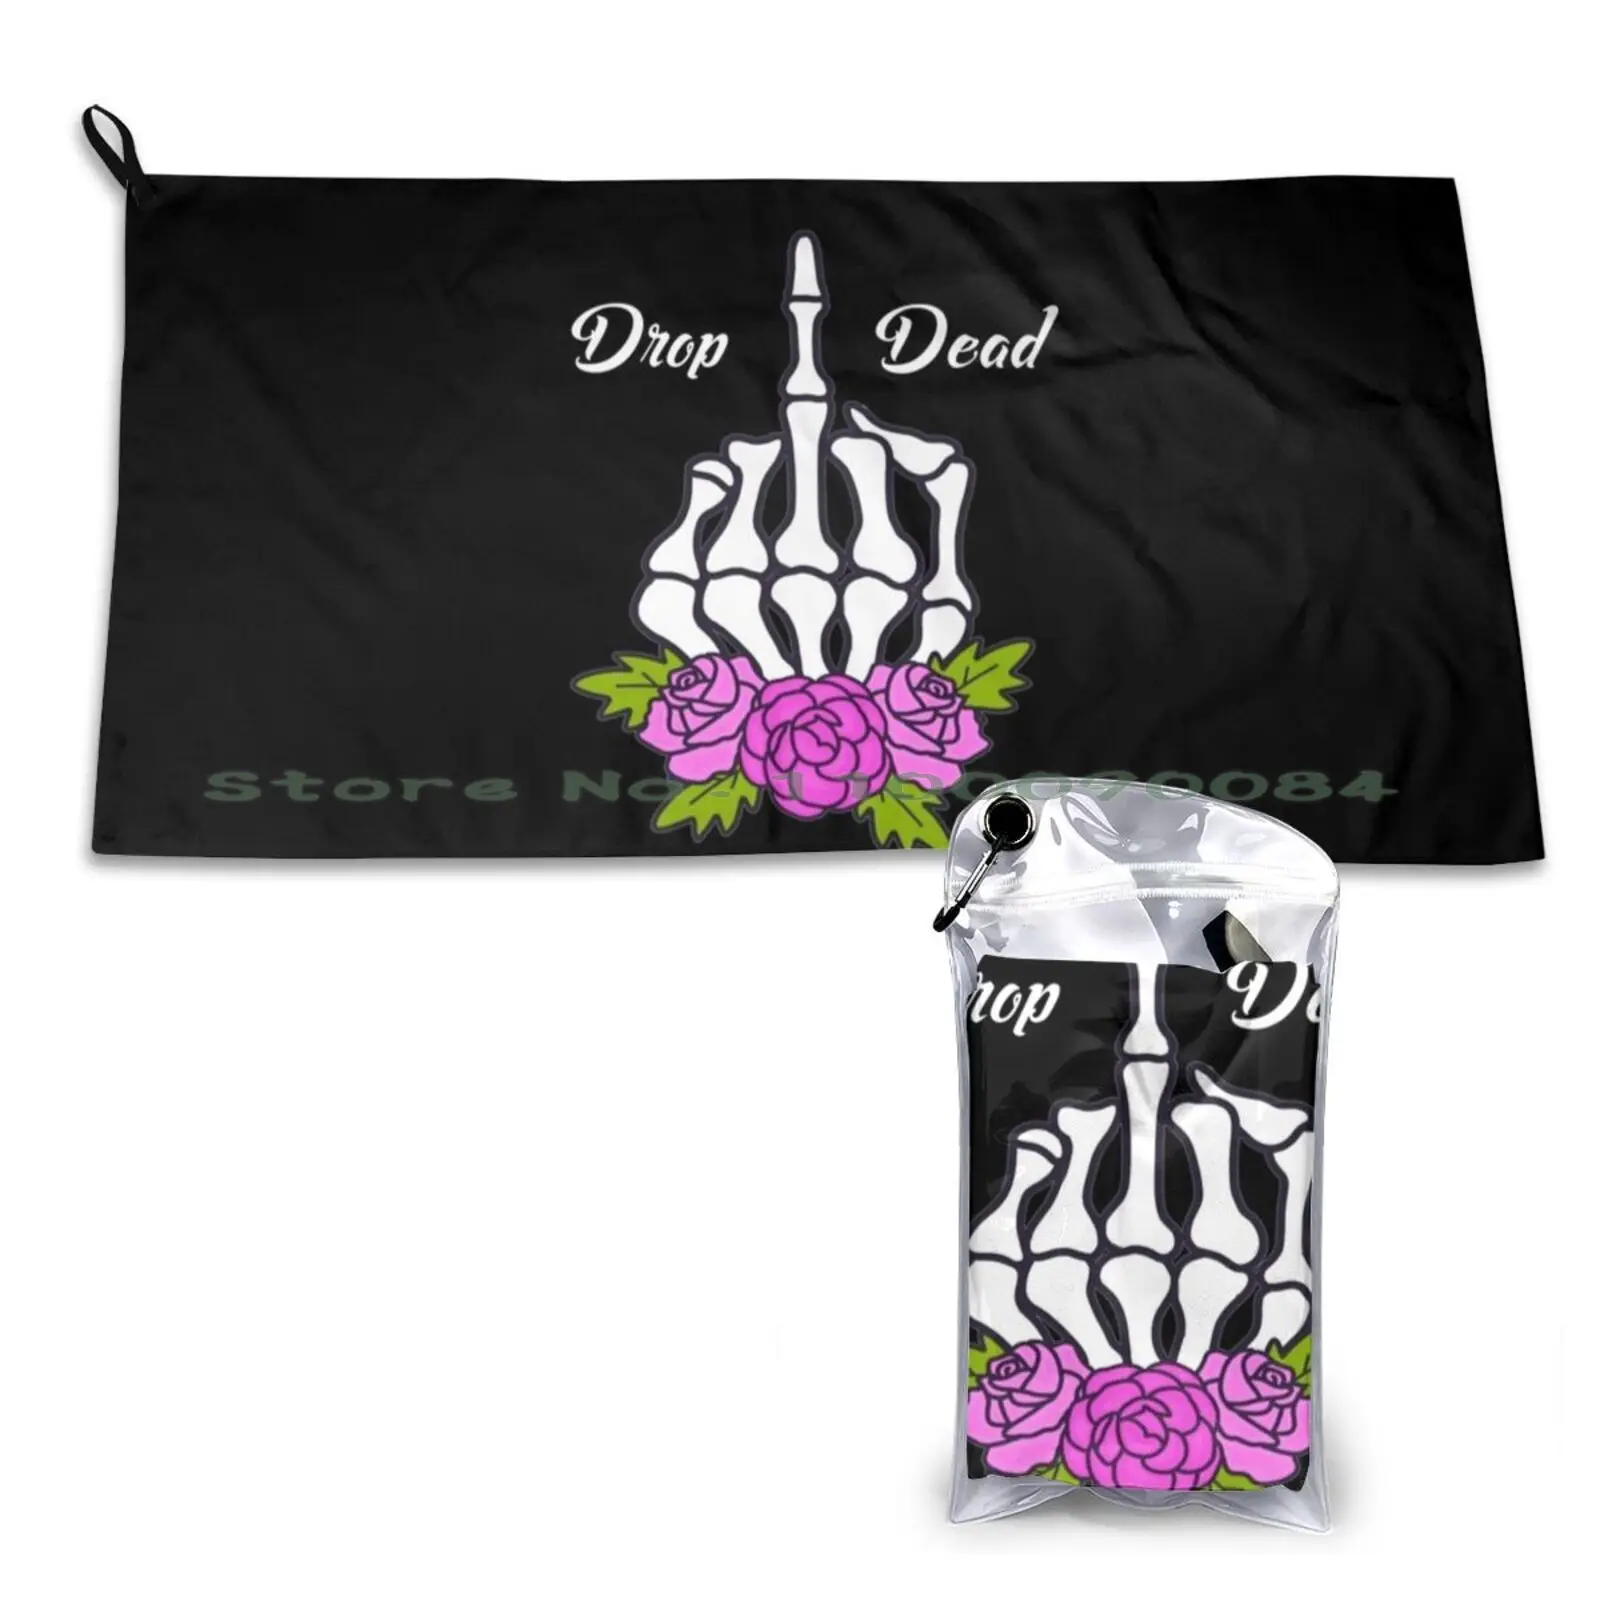 

Drop Dead Skeletal Middle Finger With Roses Quick Dry Towel Gym Sports Bath Portable Achira Nadeeshan Watercolor Cute Nature